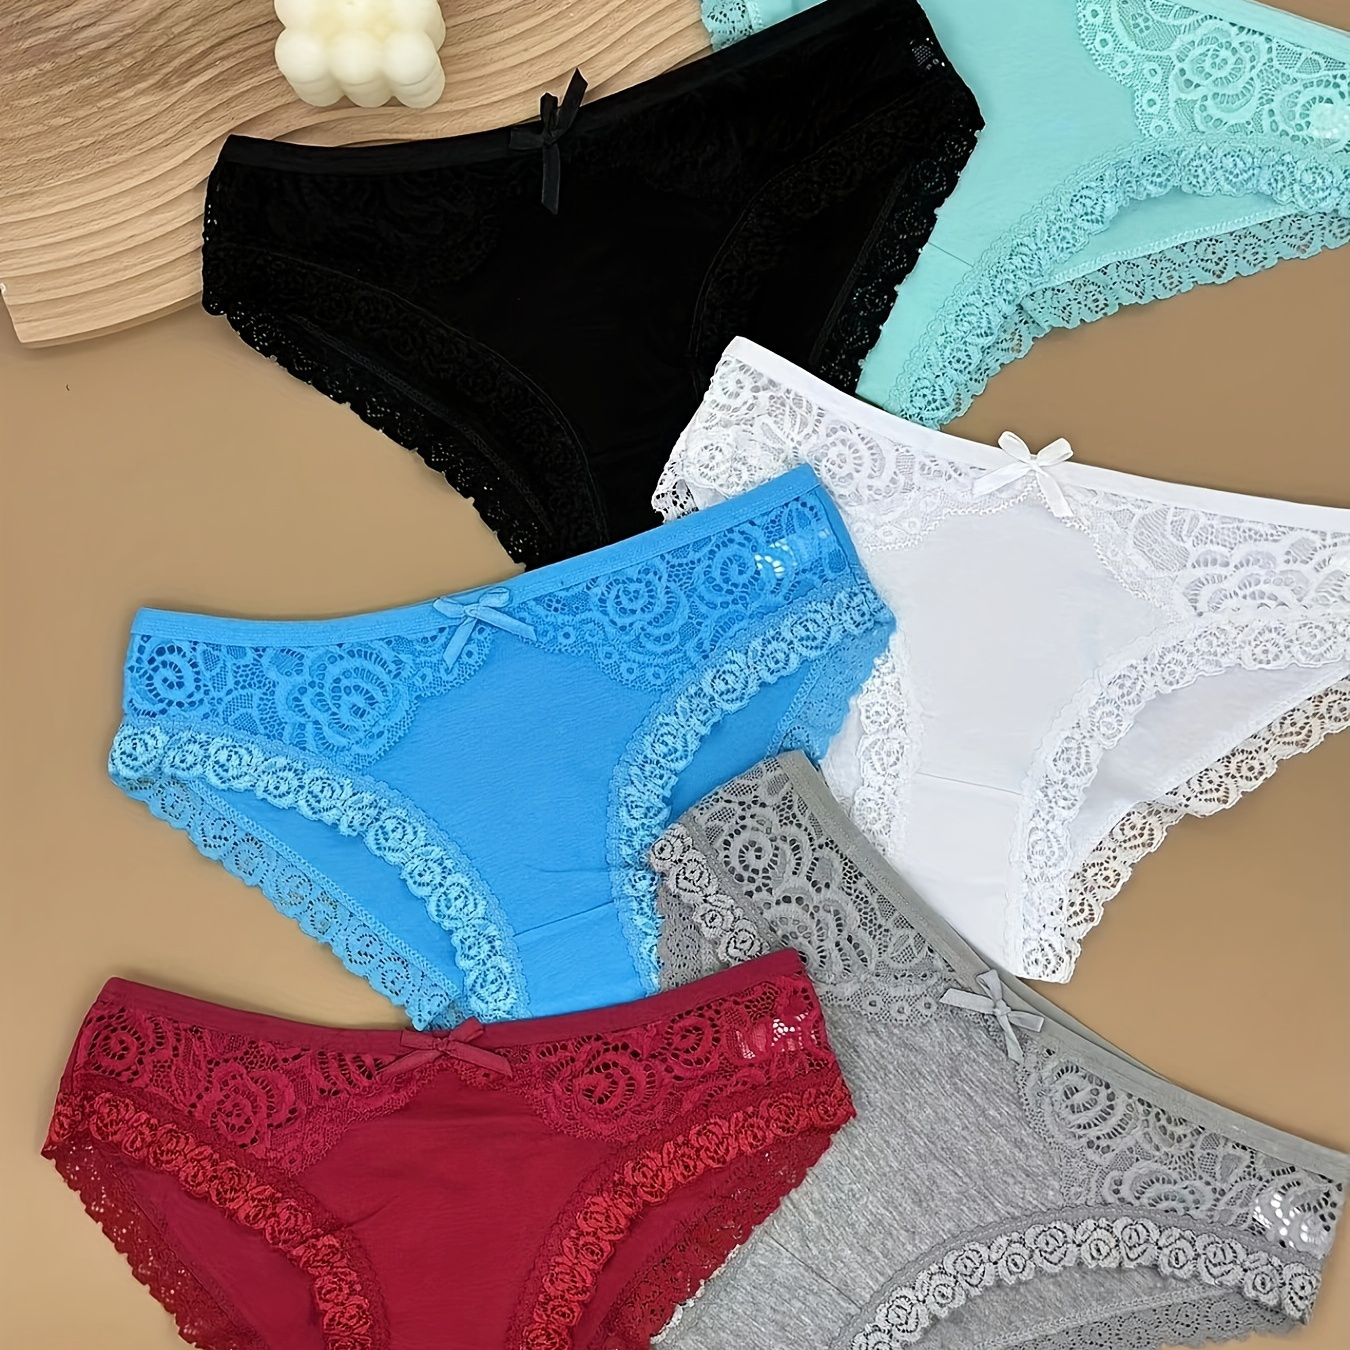 

6pcs Floral Lace Stitching Briefs, Comfy & Breathable Stretchy Intimates Panties, Women's Lingerie & Underwear